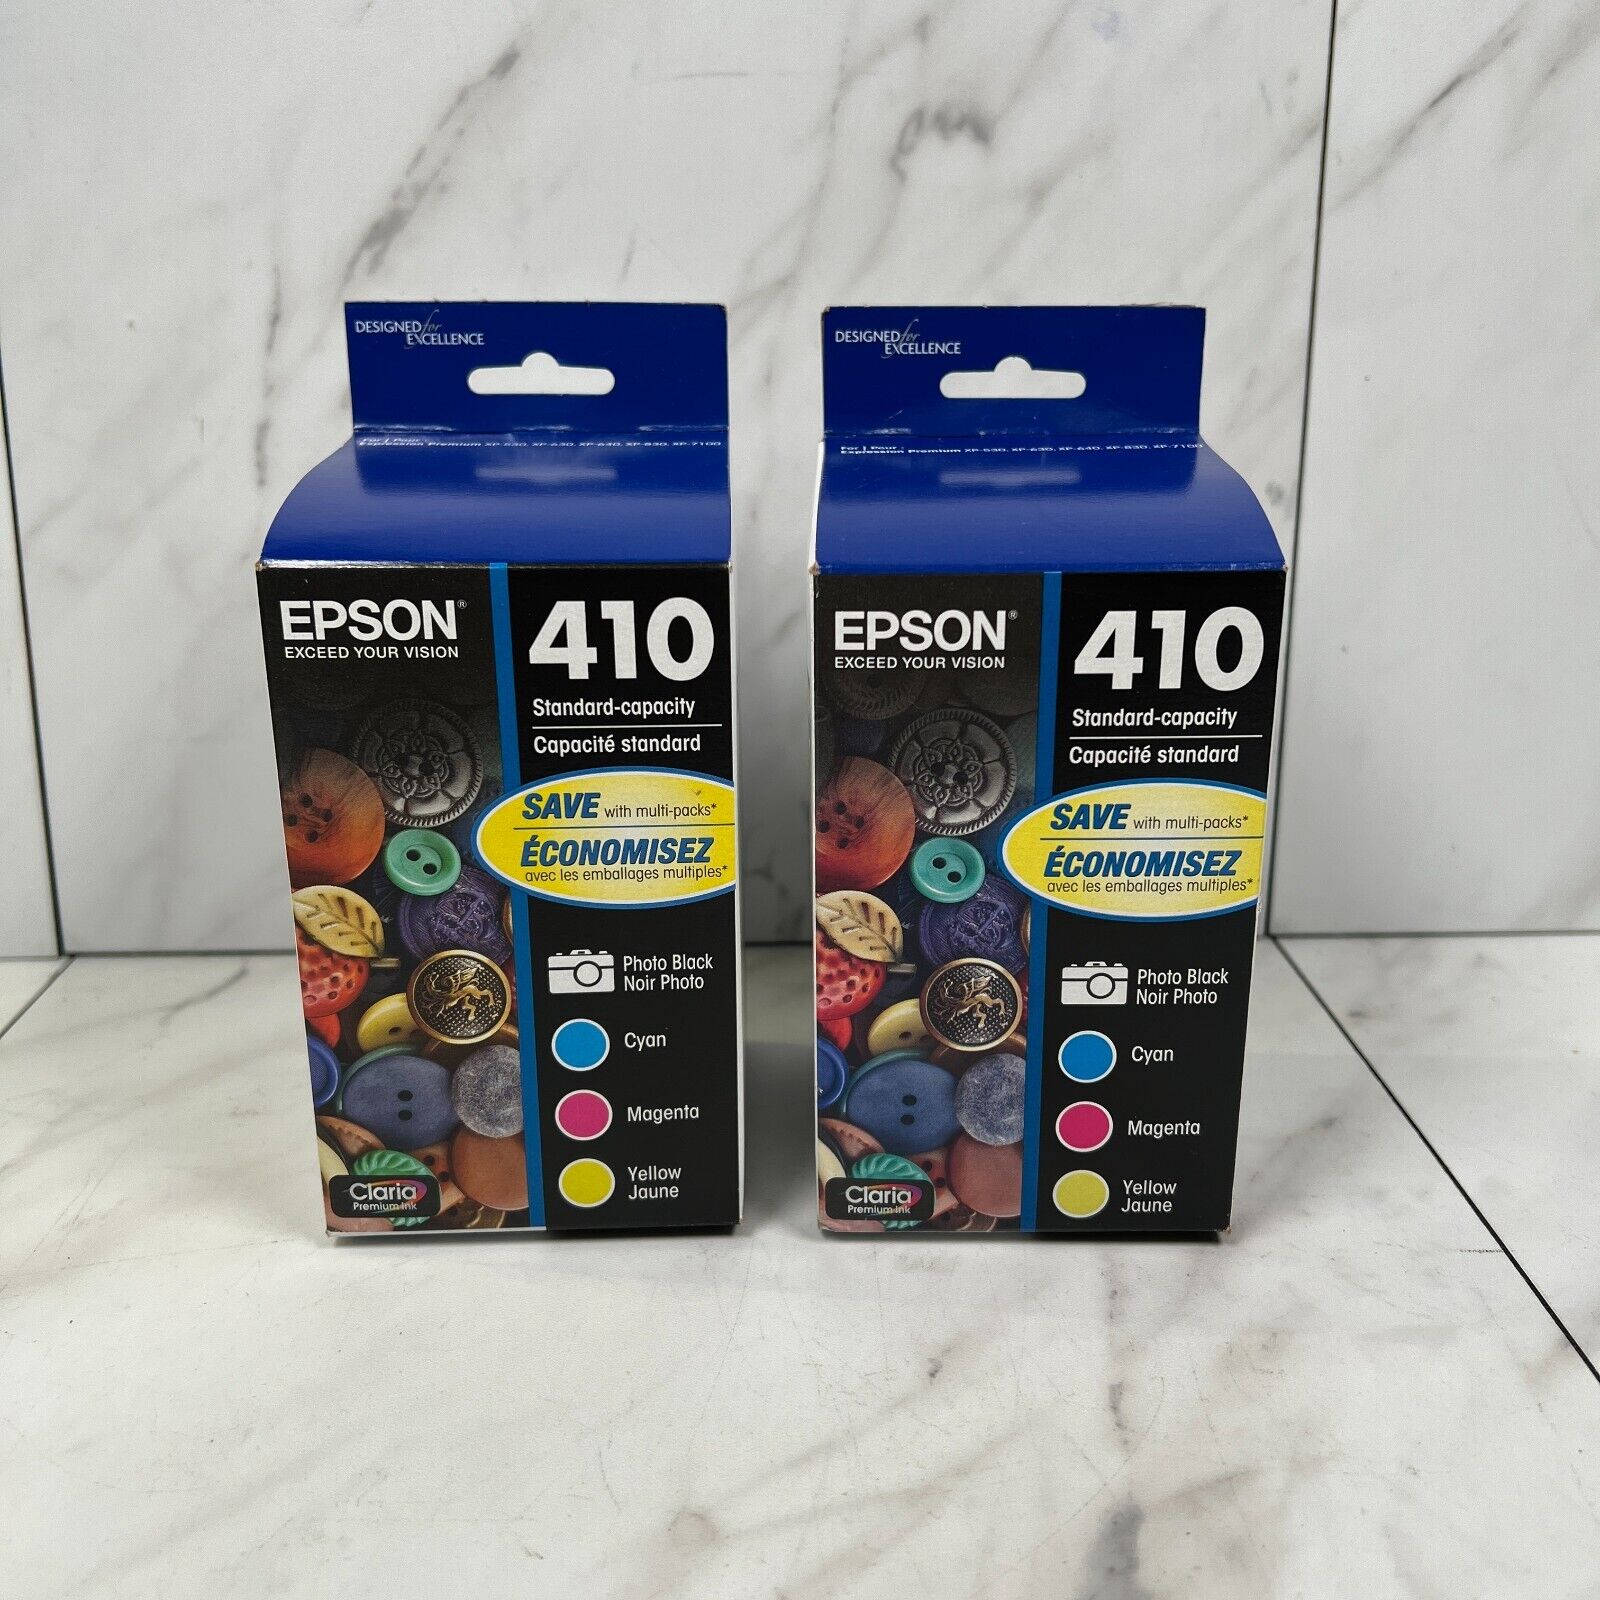 x2 NEW Genuine Epson 410 Color Ink Cartridges Cyan Magenta Yellow [EXP 03/2026]